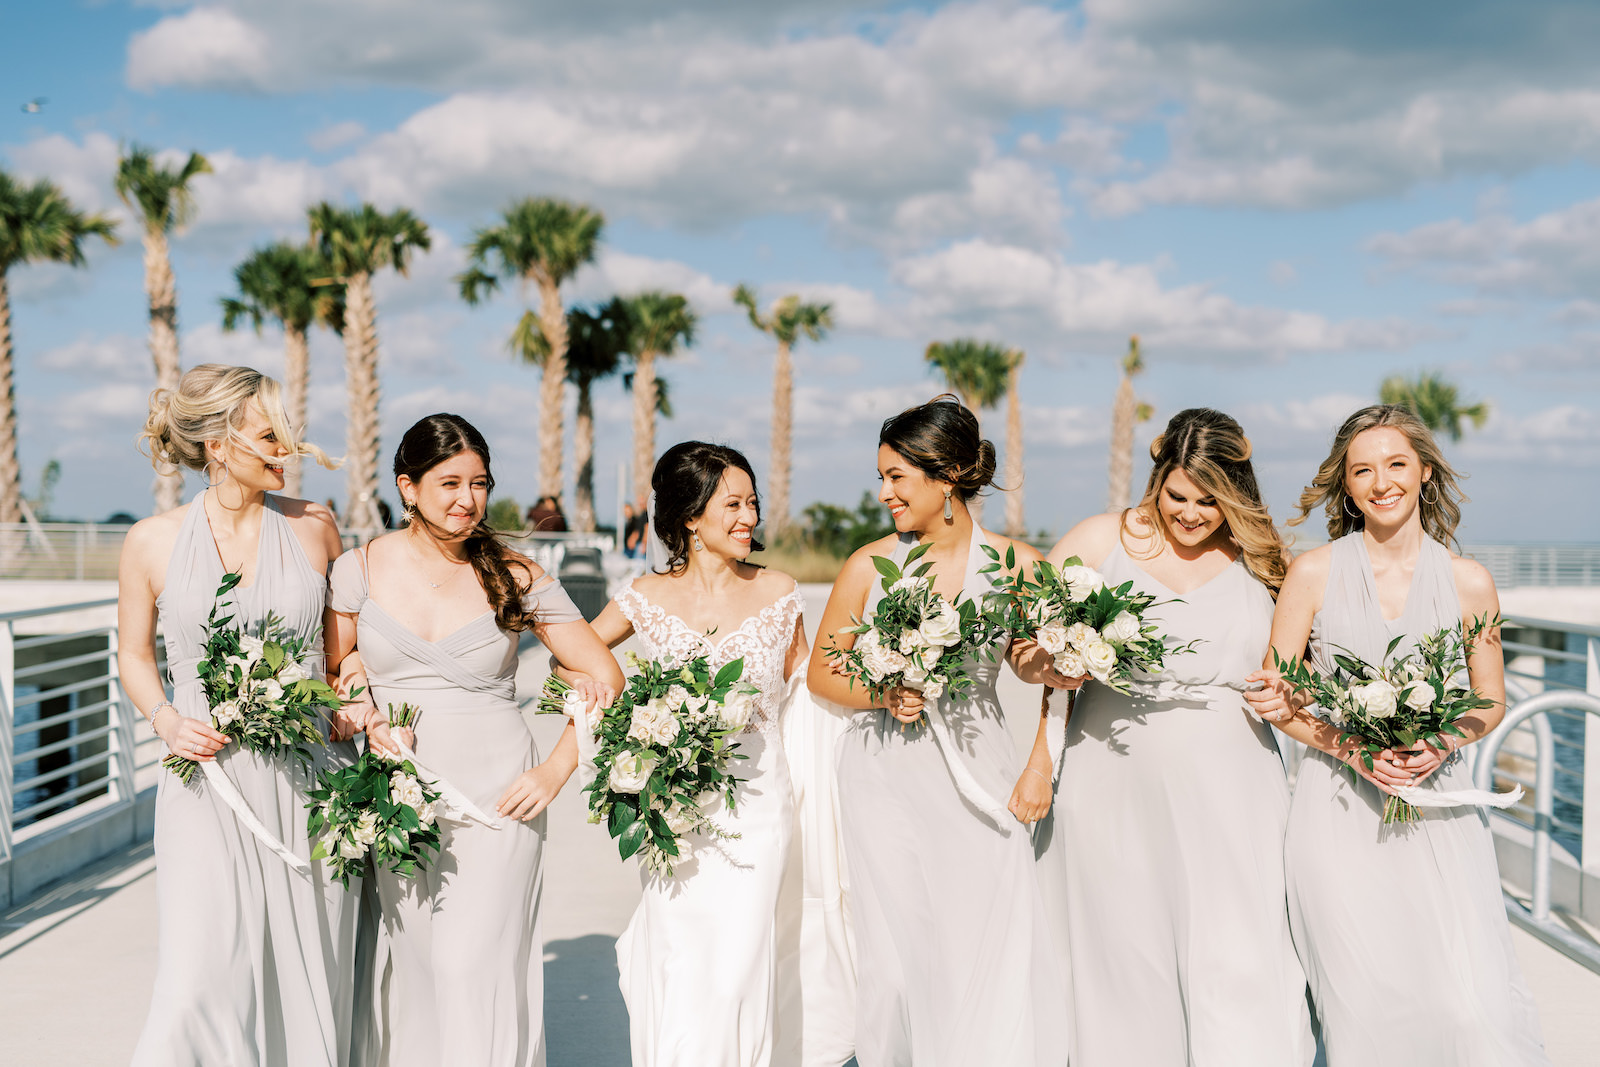 Bride in Wtoo by Watters Lace and Illusion Crepe Off the Shoulder Wedding Dress, Bridesmaids in Mix and Match Gray Dresses | Tampa Bay Wedding Photographer Kera Photography | Wedding Hair and Makeup Femme Akoi | St. Pete Pier Bridal Party Portrait